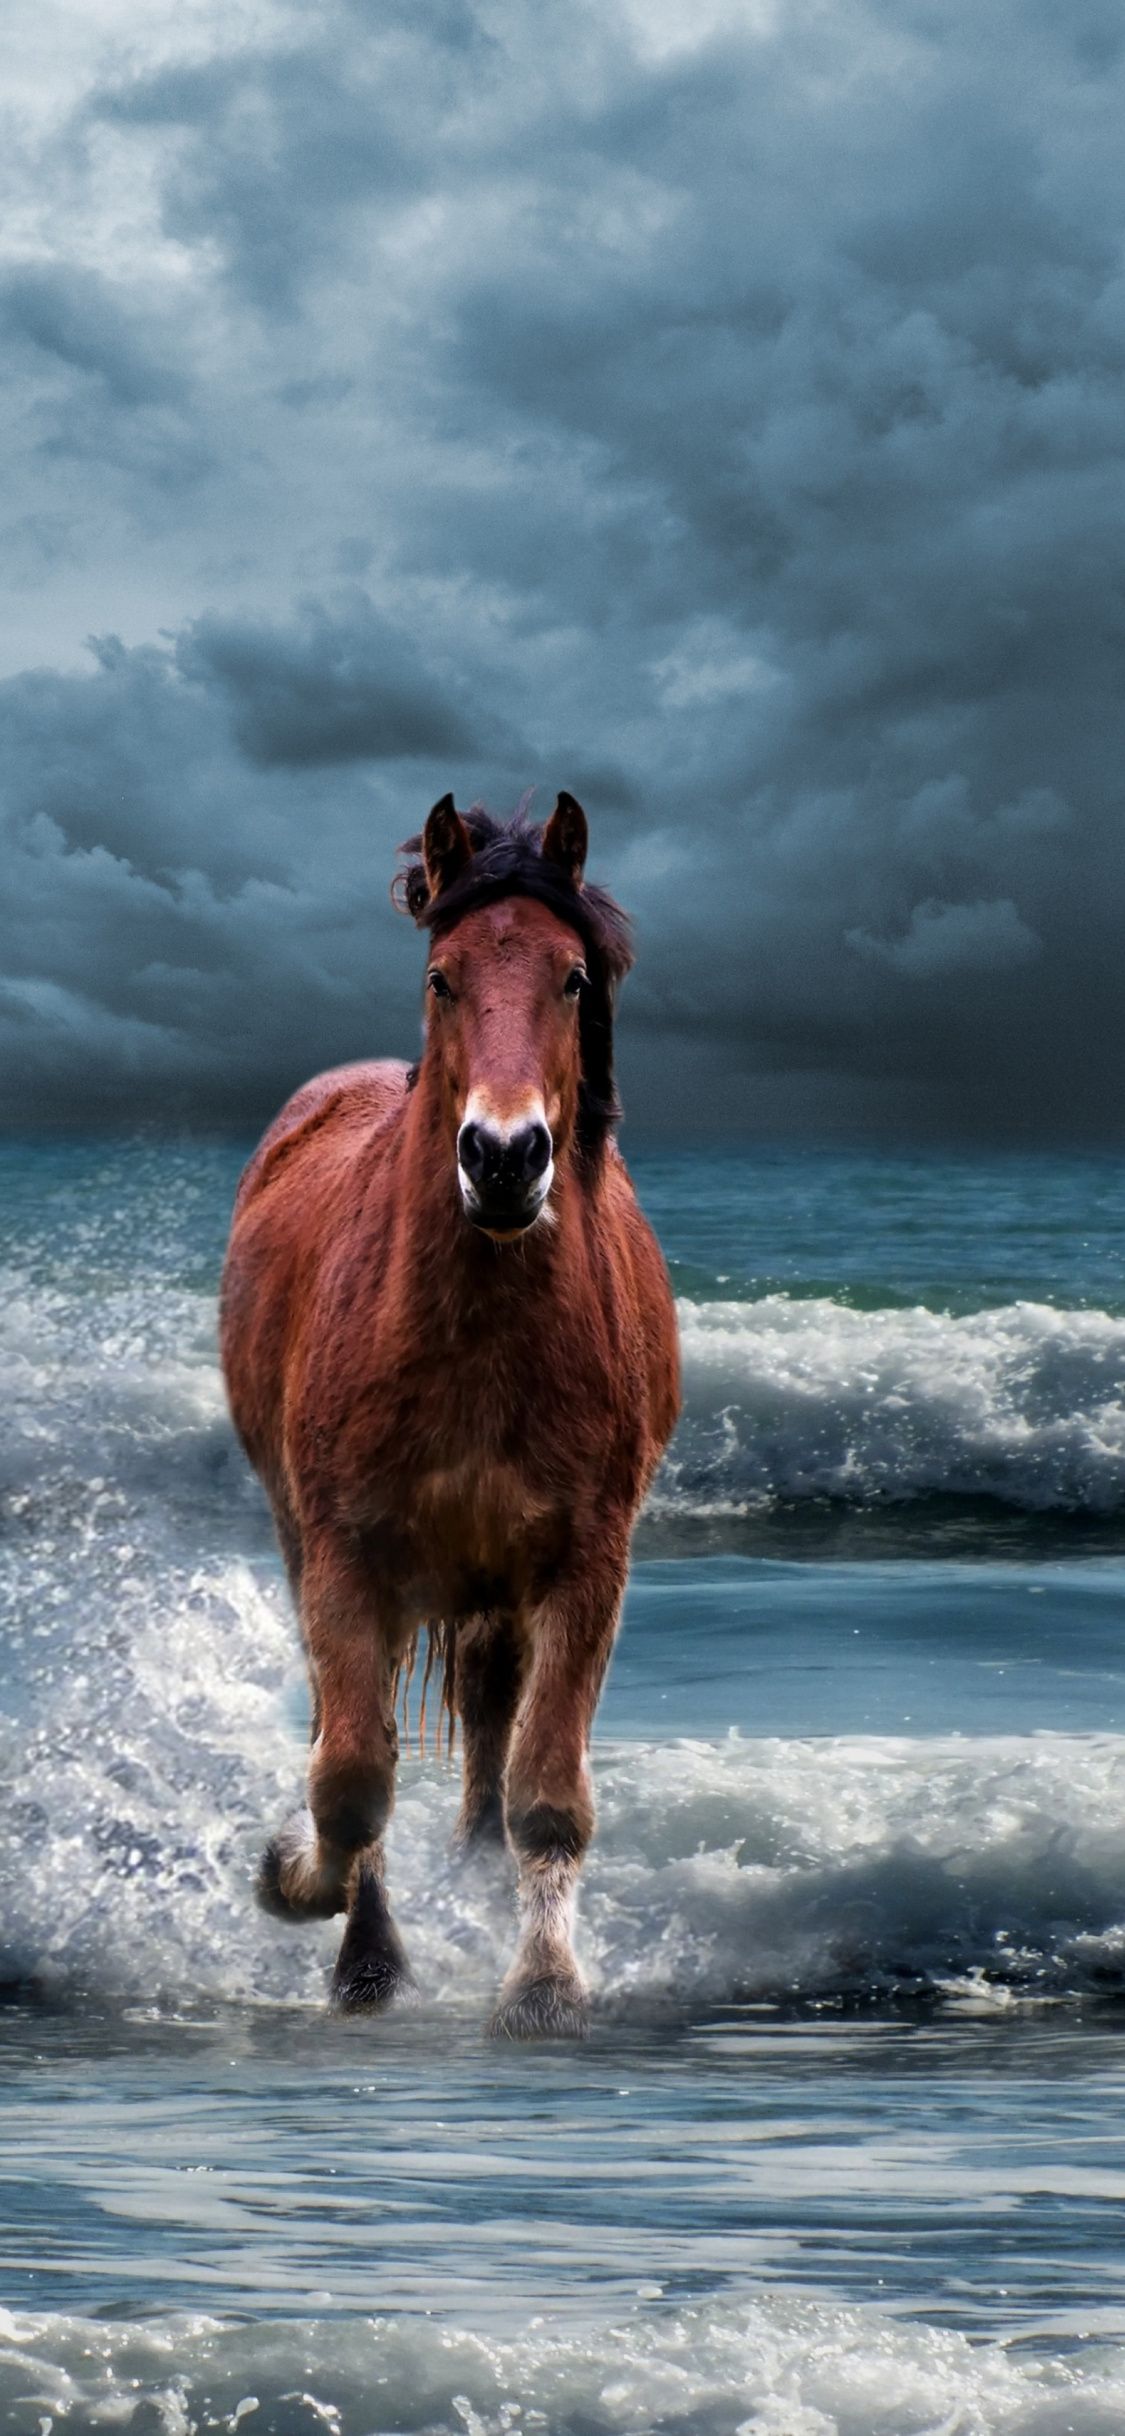 Horse Wallpaper HD - Apps on Google Play